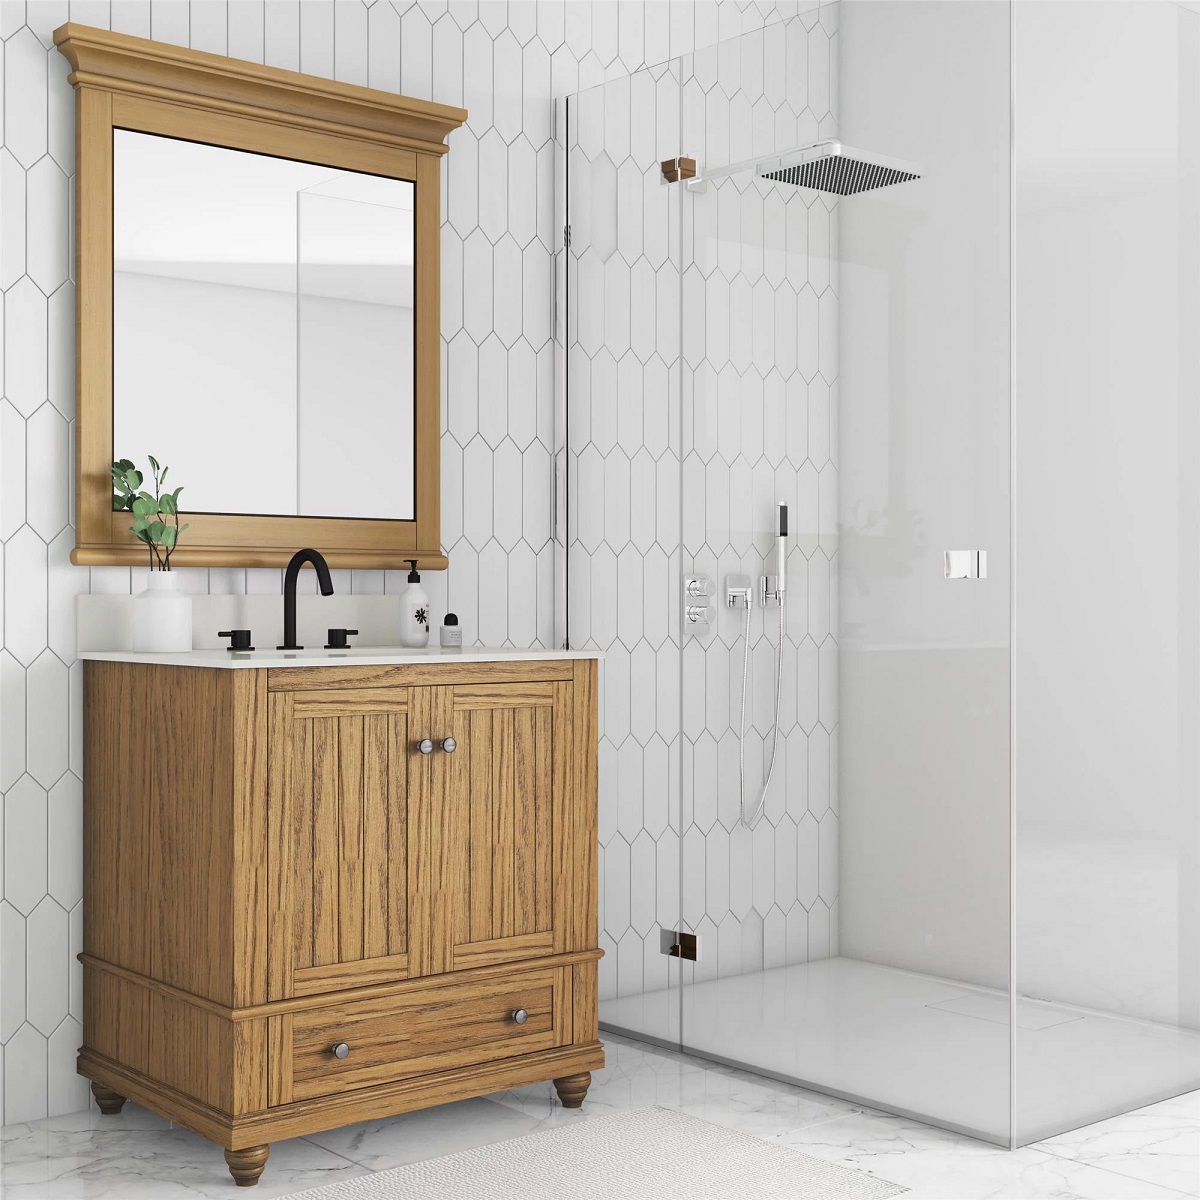 What Is The Ideal Mirror Size For A 30-Inch Vanity